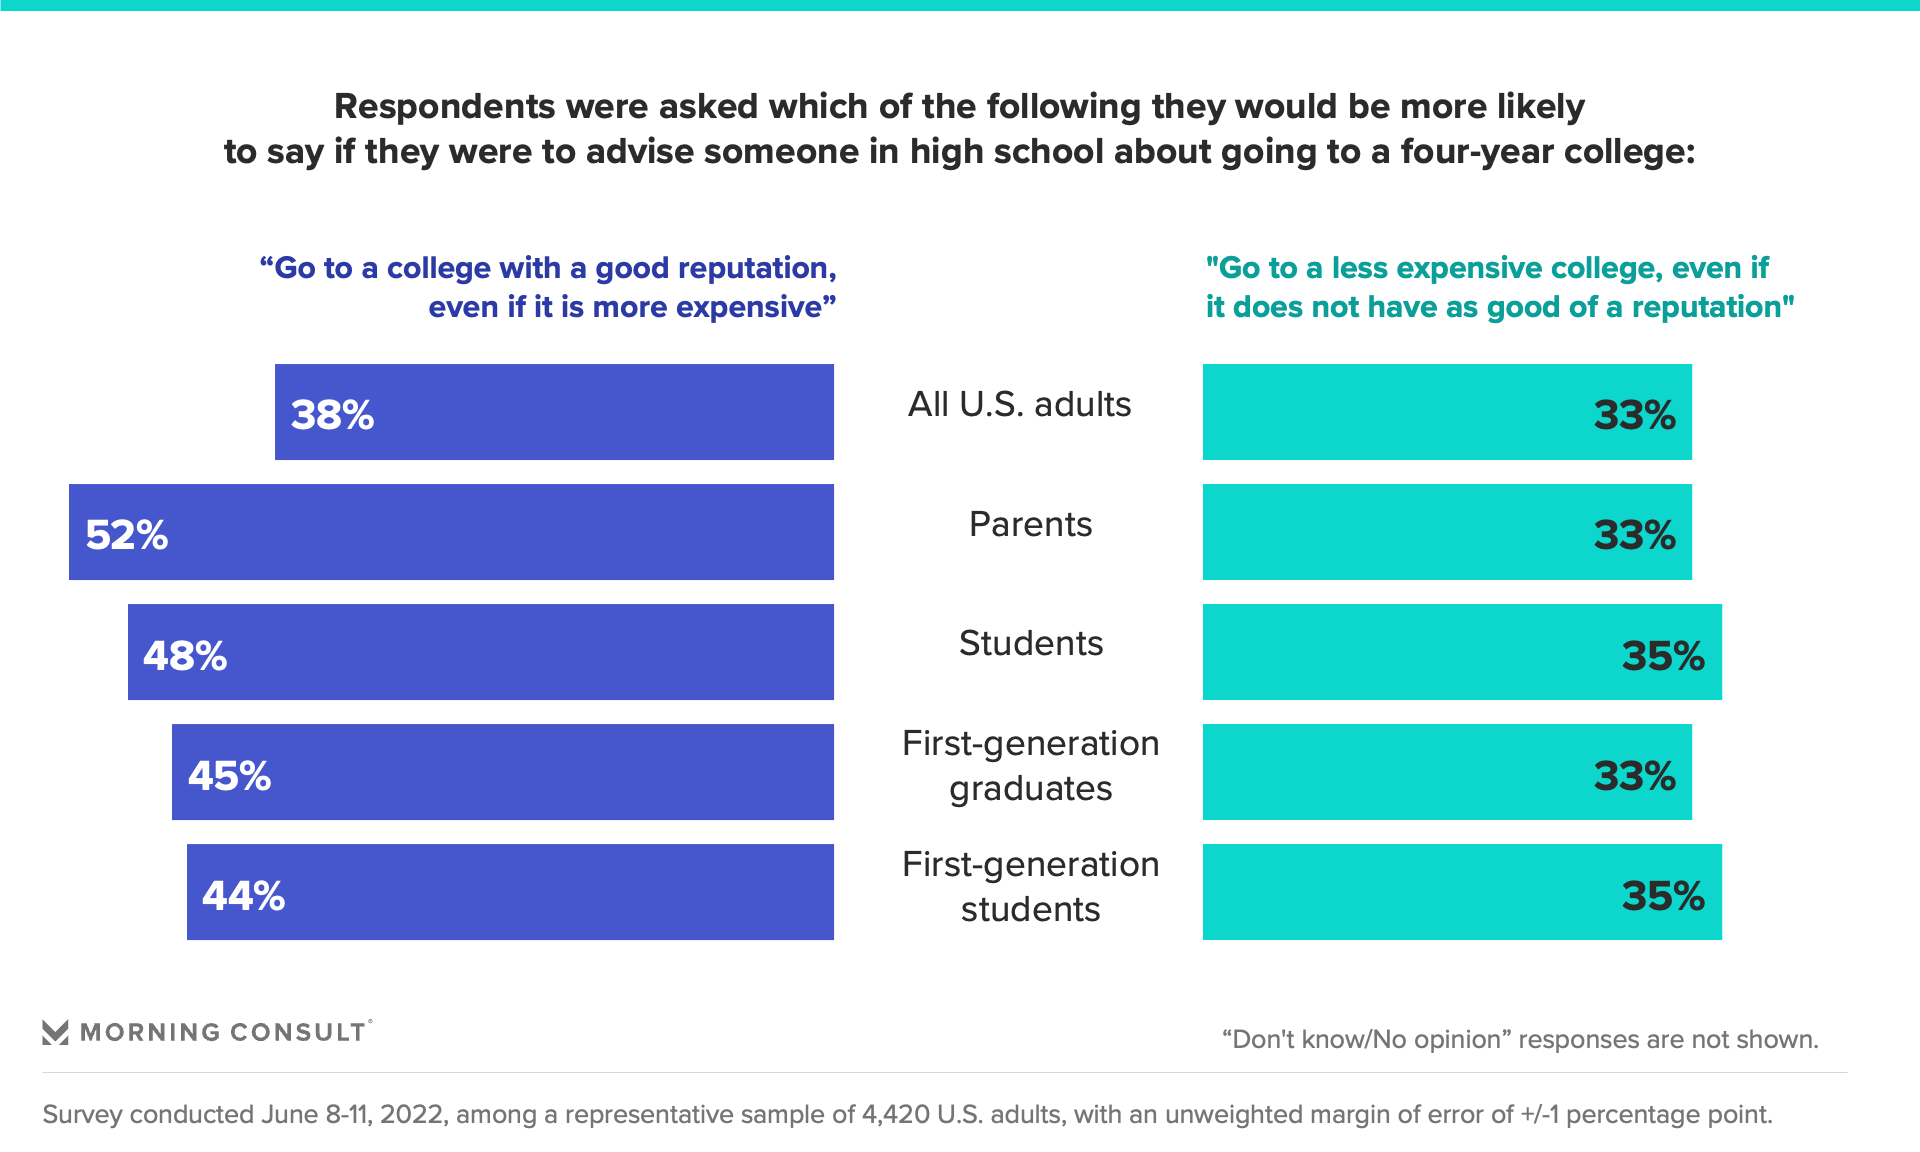 Chart conveying what respondents would advise high school students about going to a four-year college